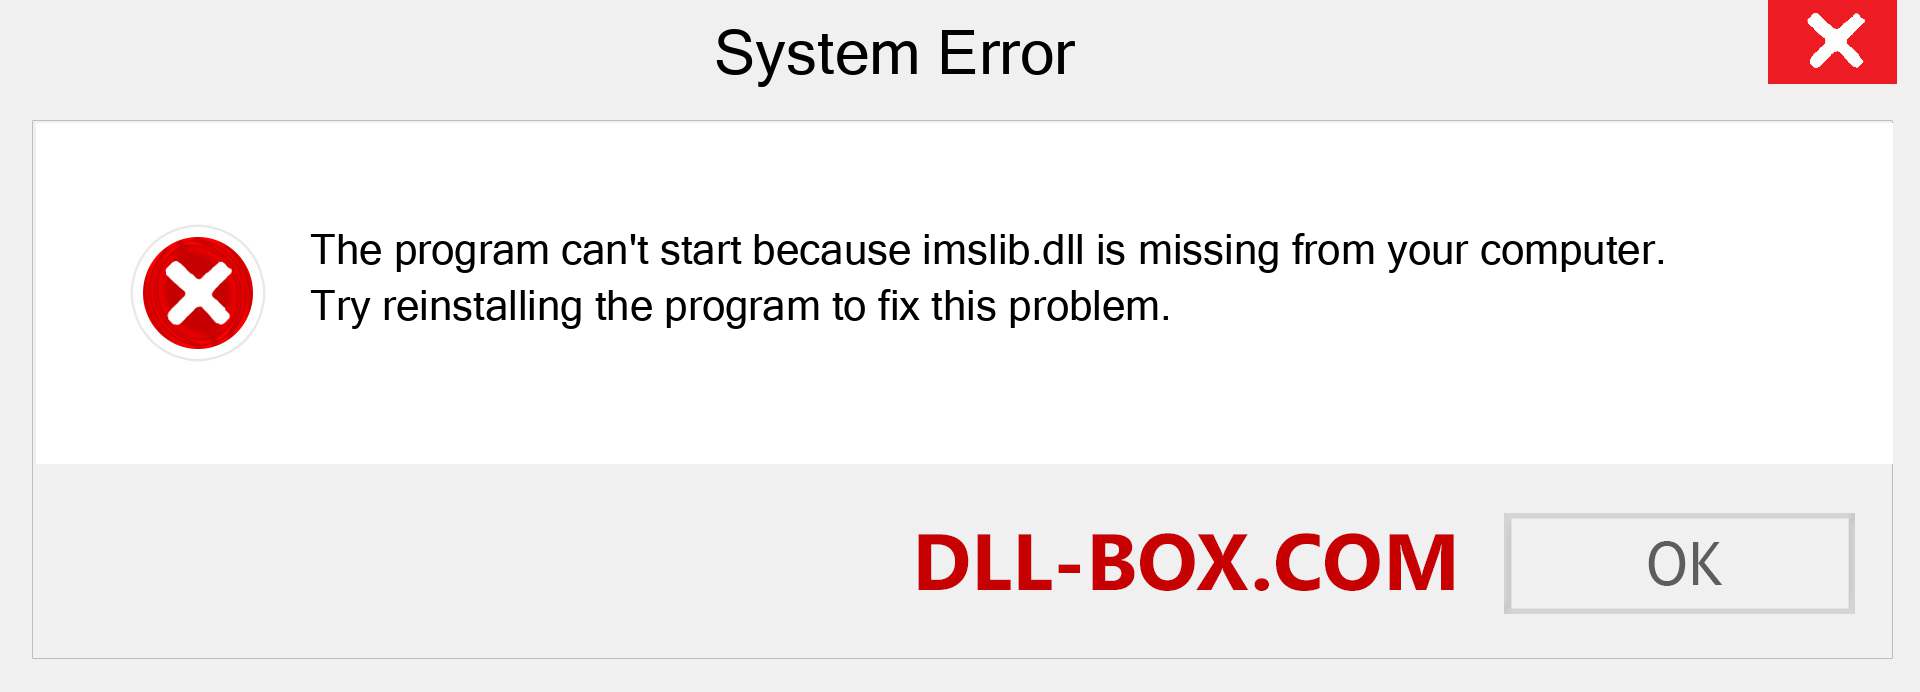  imslib.dll file is missing?. Download for Windows 7, 8, 10 - Fix  imslib dll Missing Error on Windows, photos, images